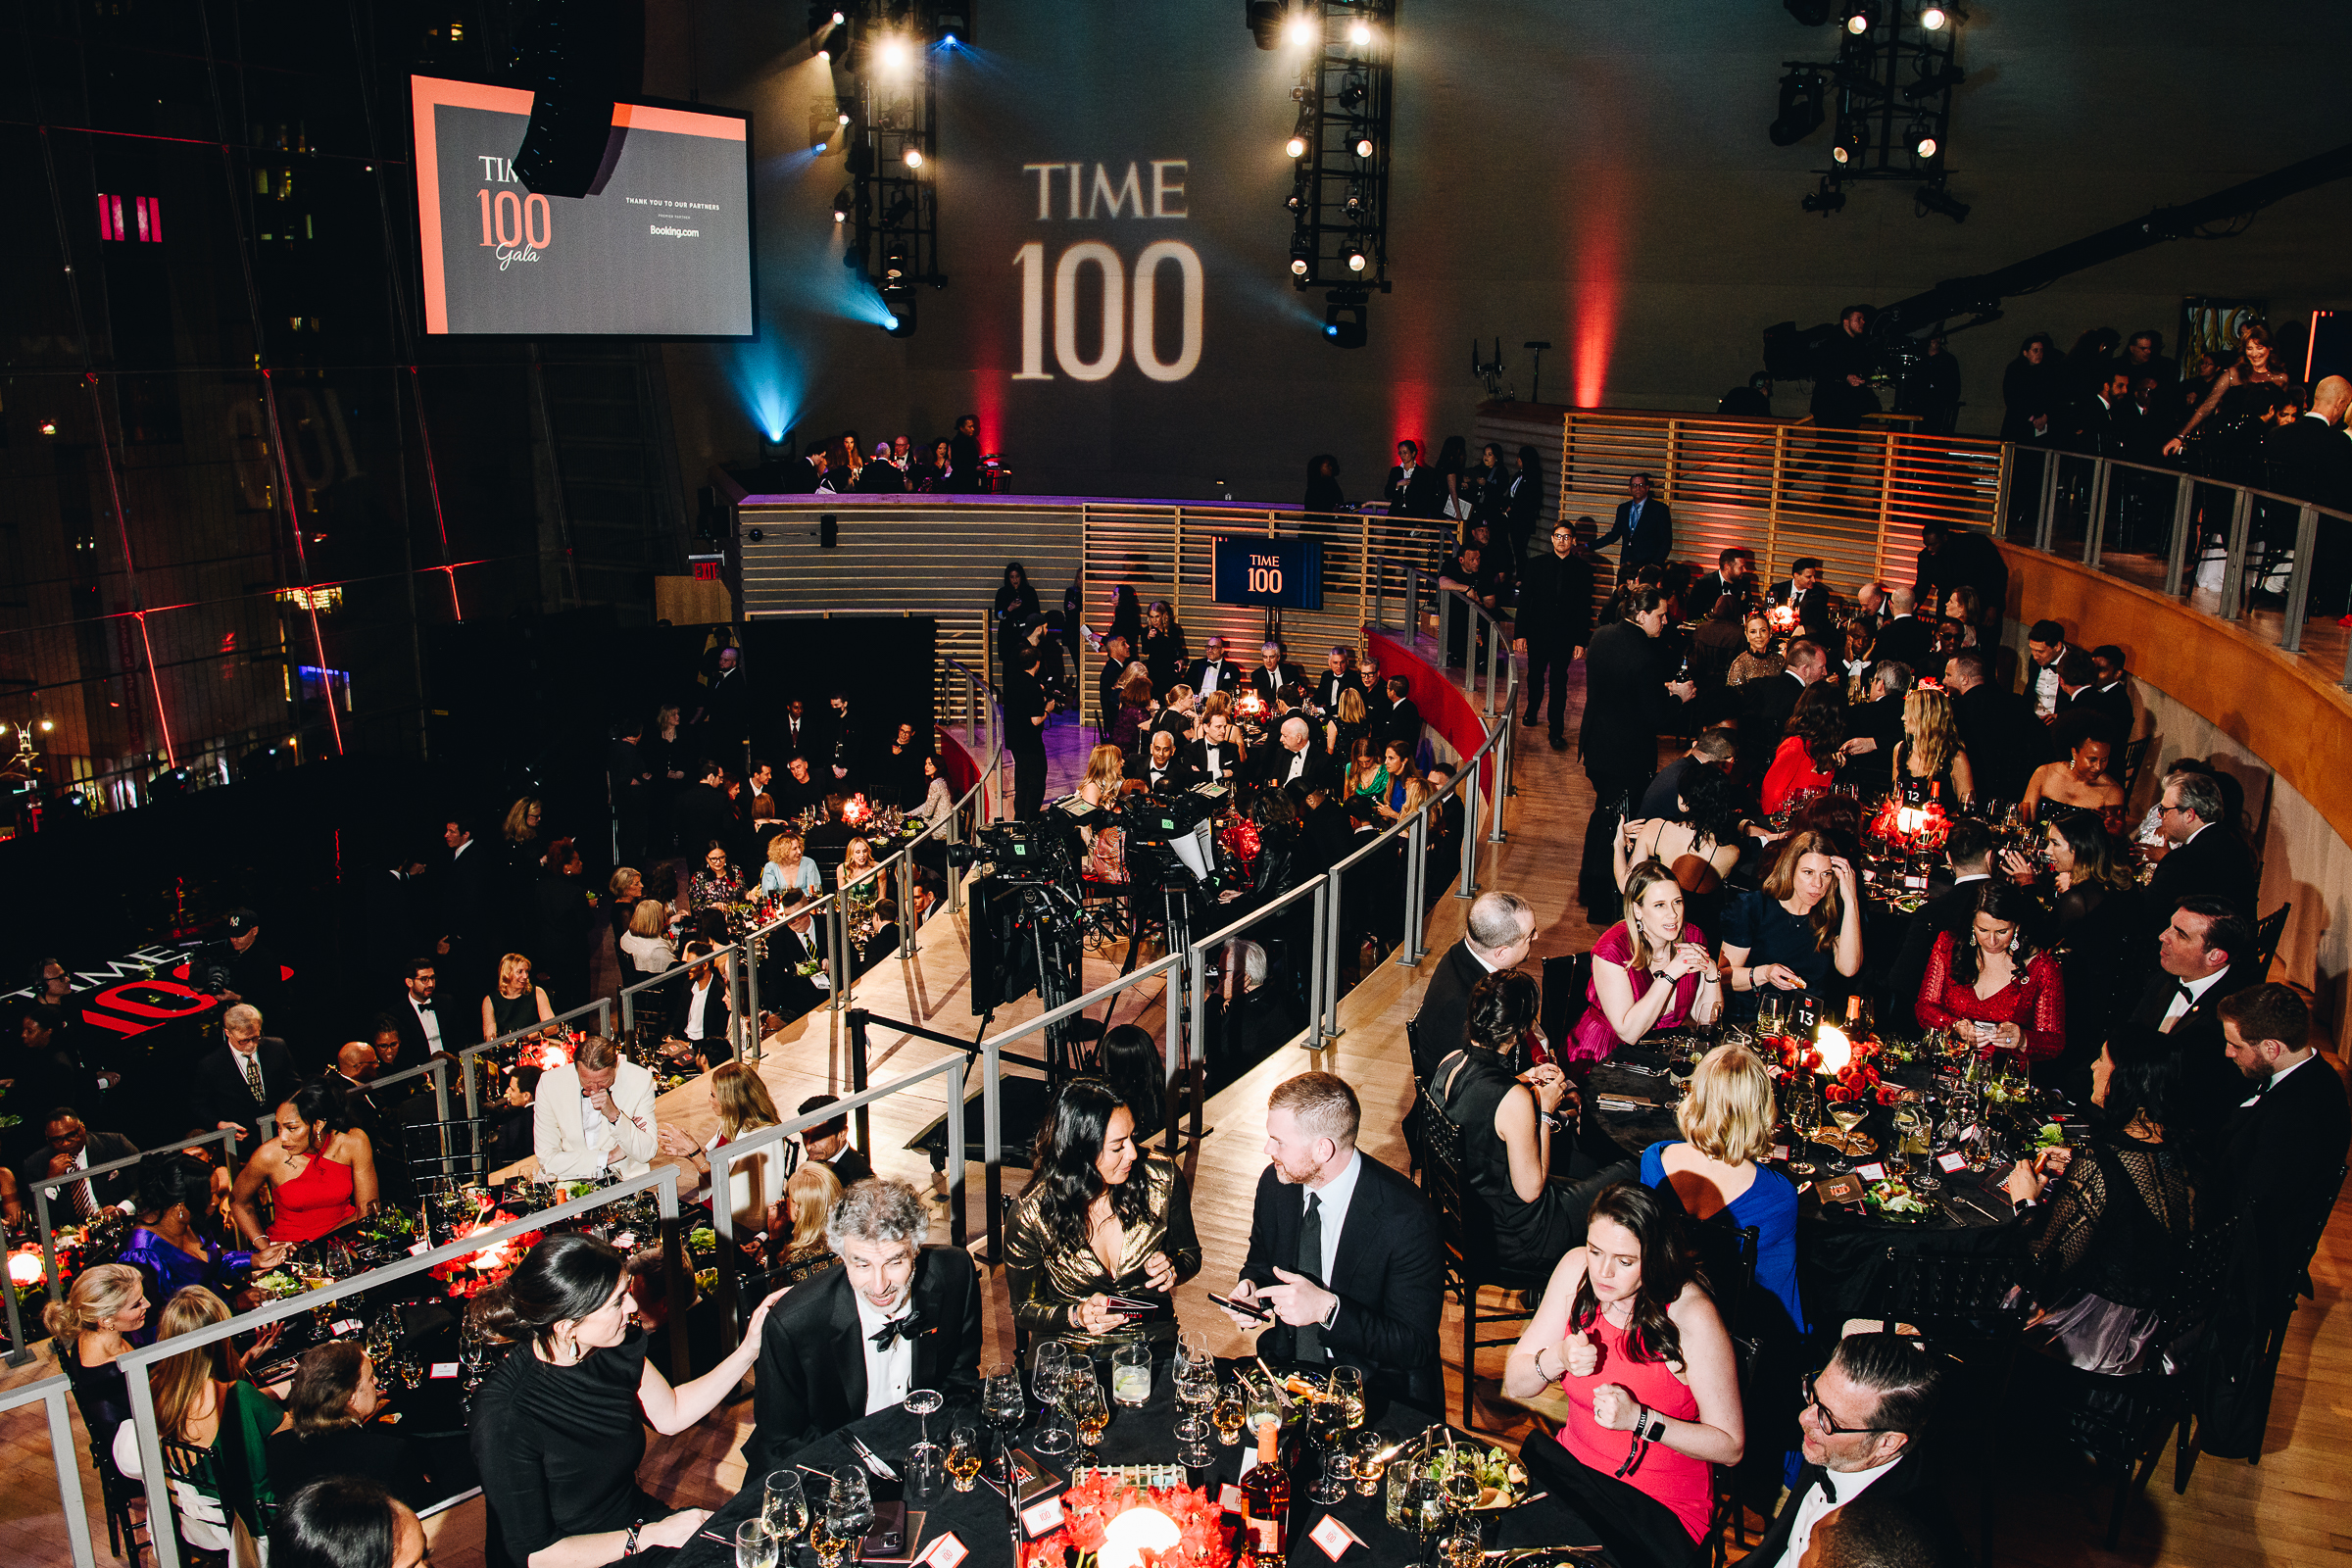 The crowd at the TIME 100 Gala